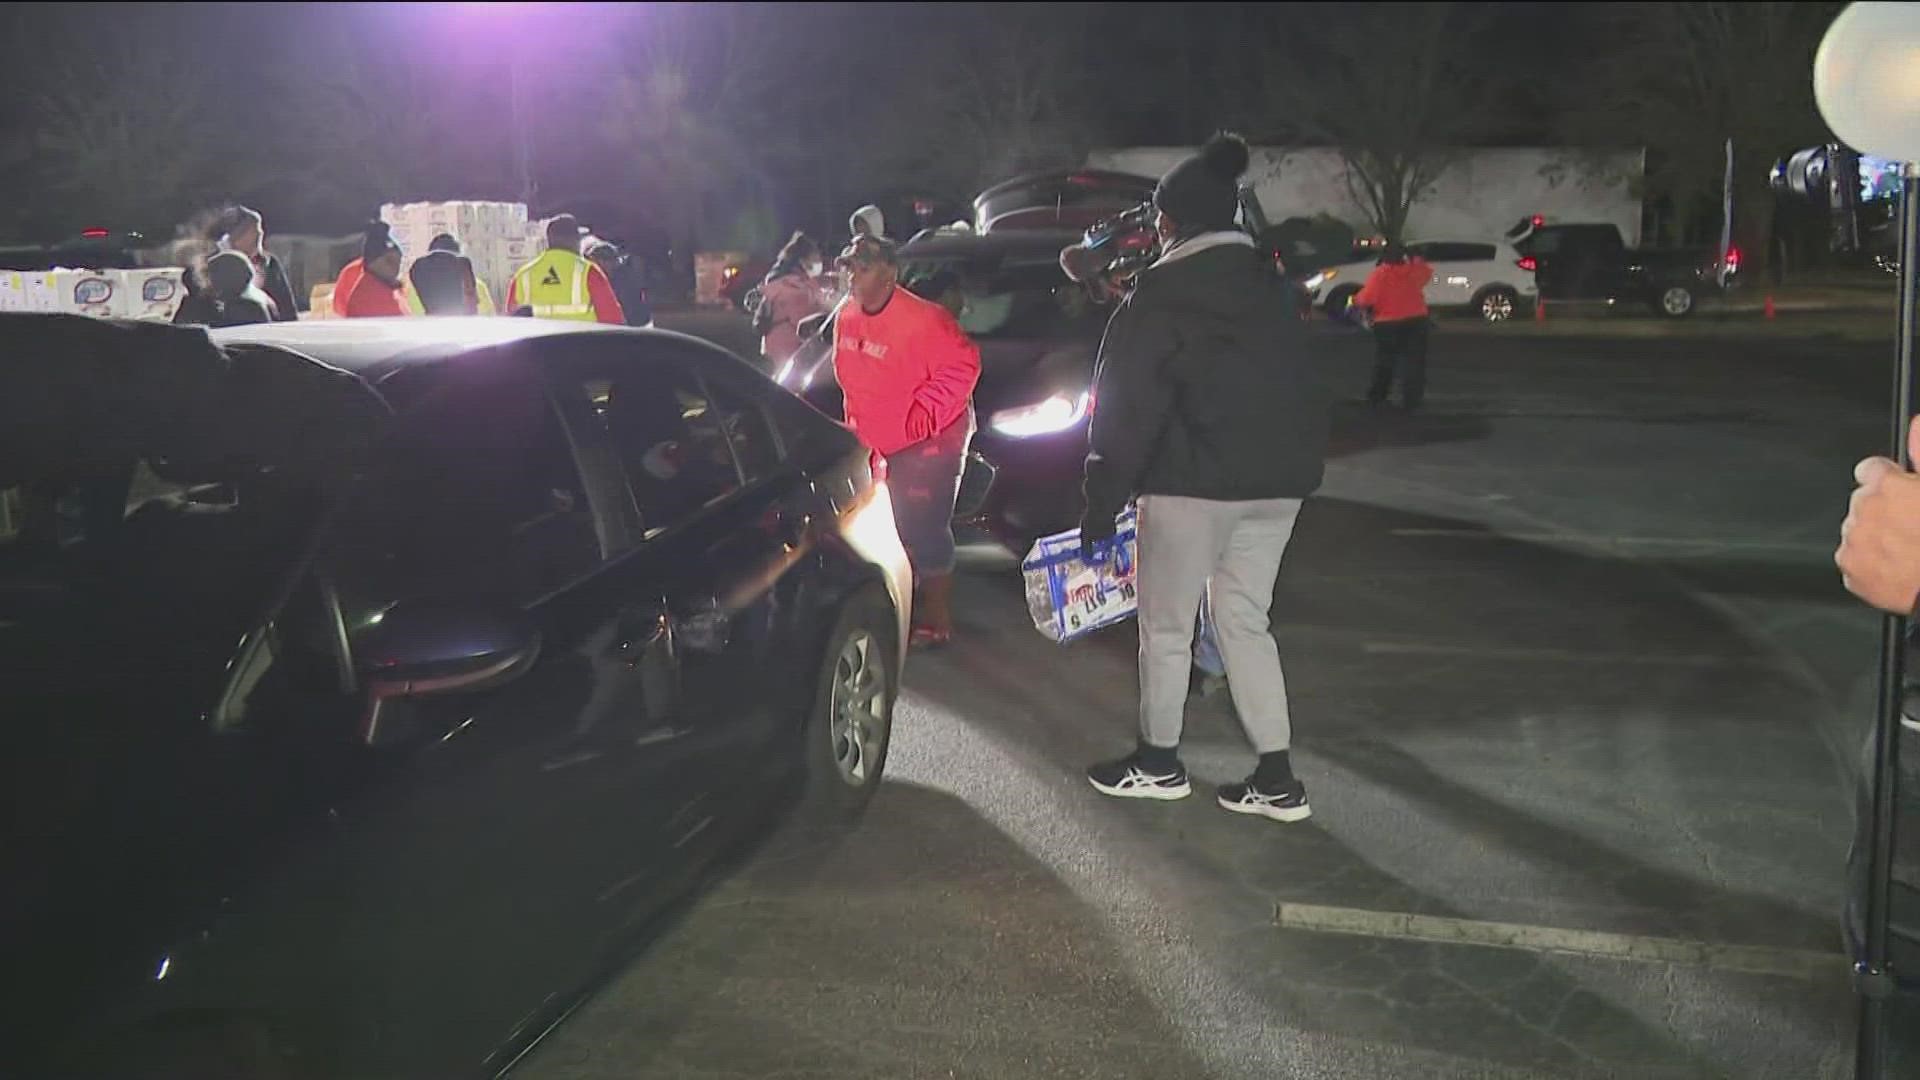 There may have been freezing temperatures in metro Atlanta Thursday morning, but thousands of hearts were warmed in the spirit of giving.